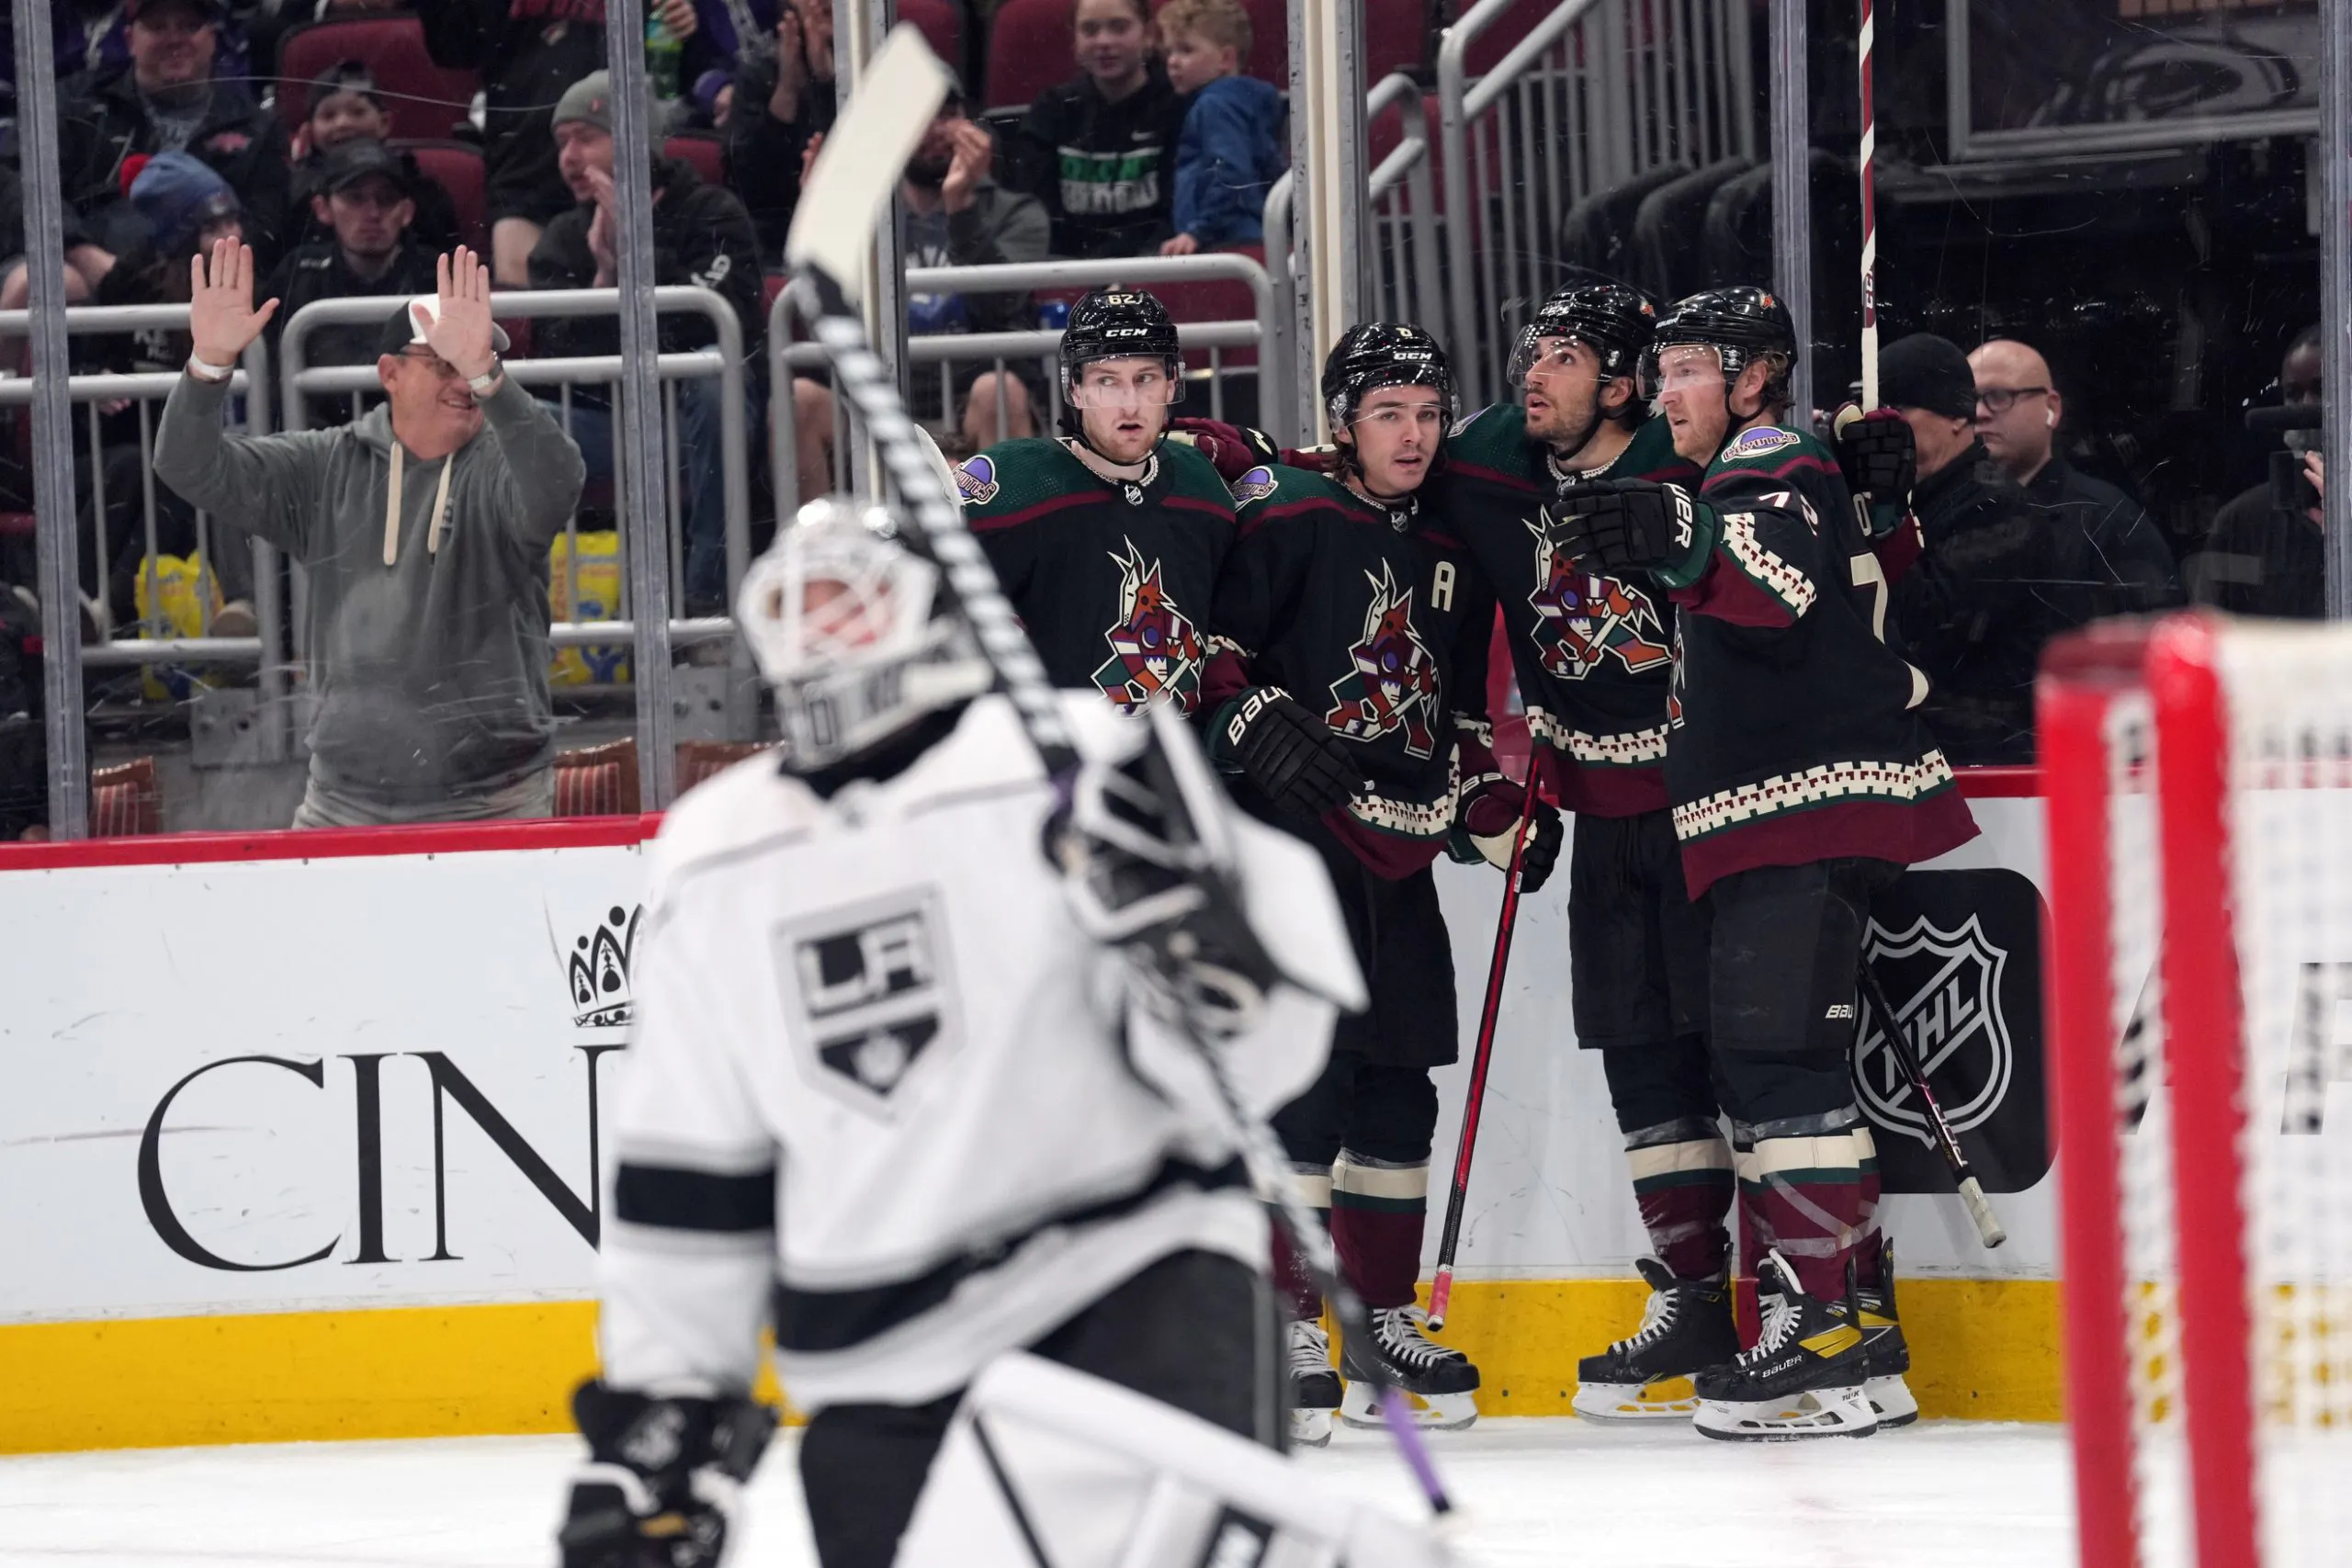 Arizona Coyotes CEO: Mullett Arena will be “sold out for every single game”